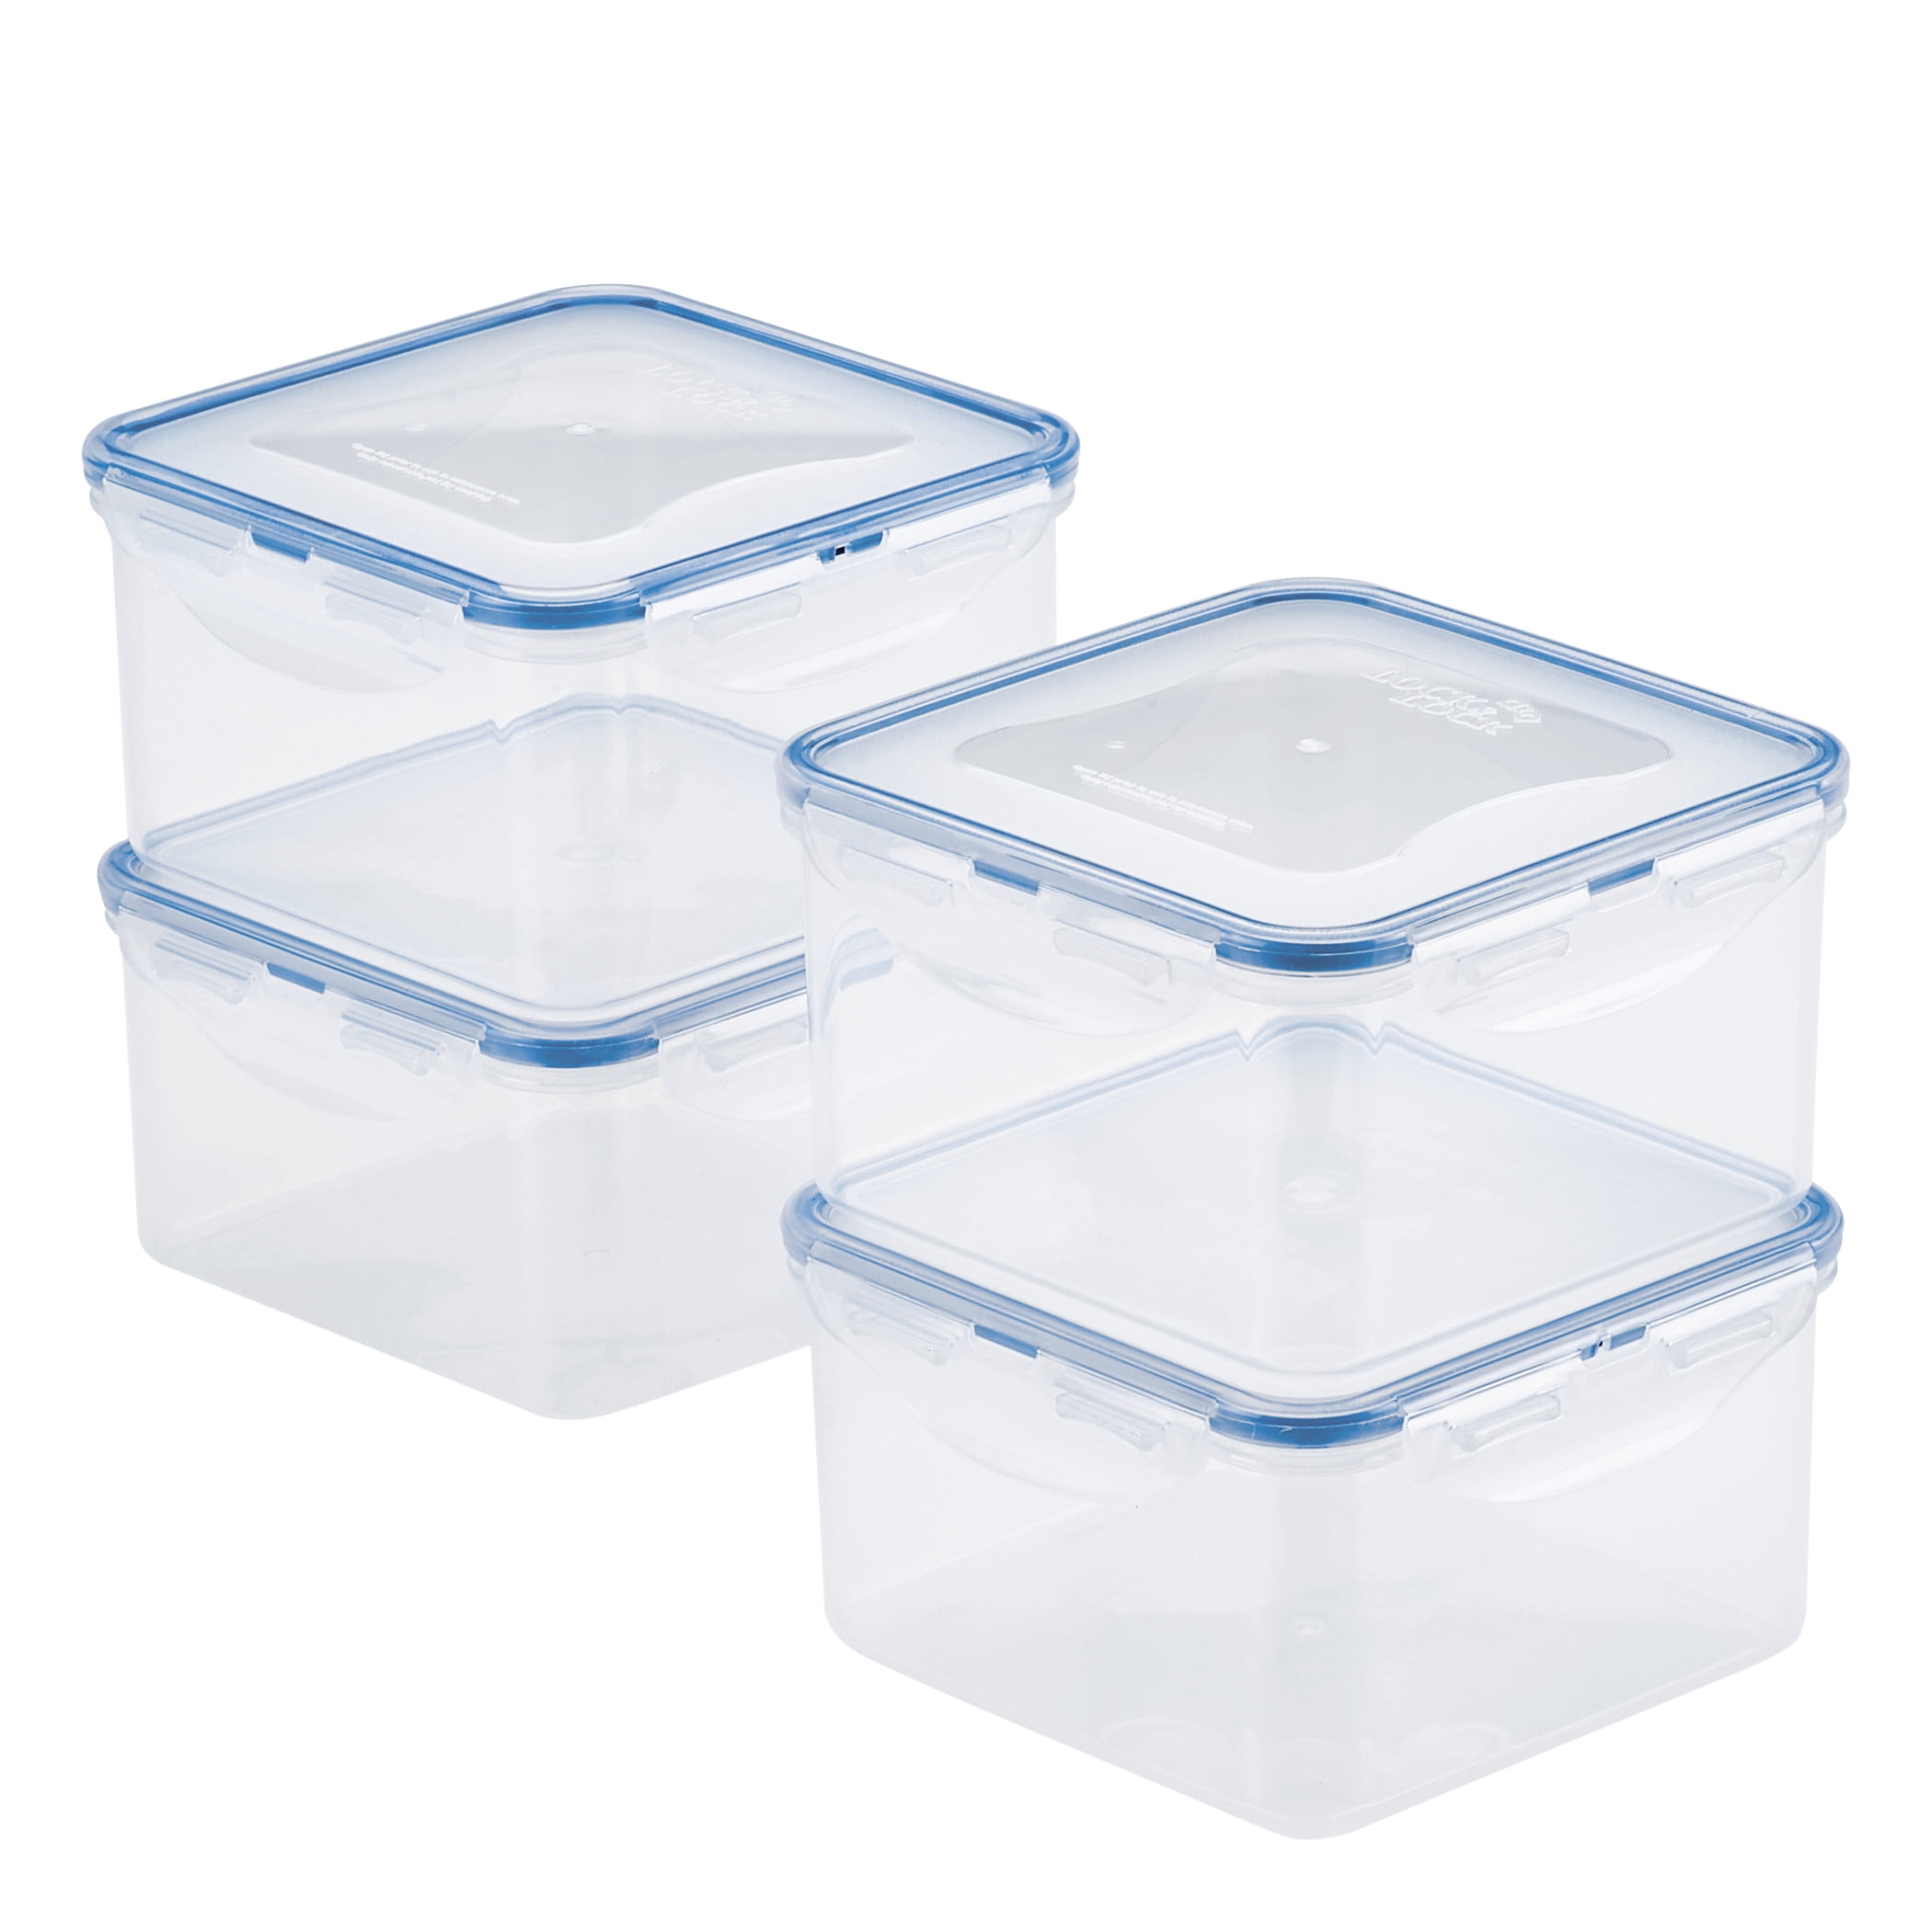 2 litre Clear 100% Airtight Lock & Lock Oven glass Rectangular Container 